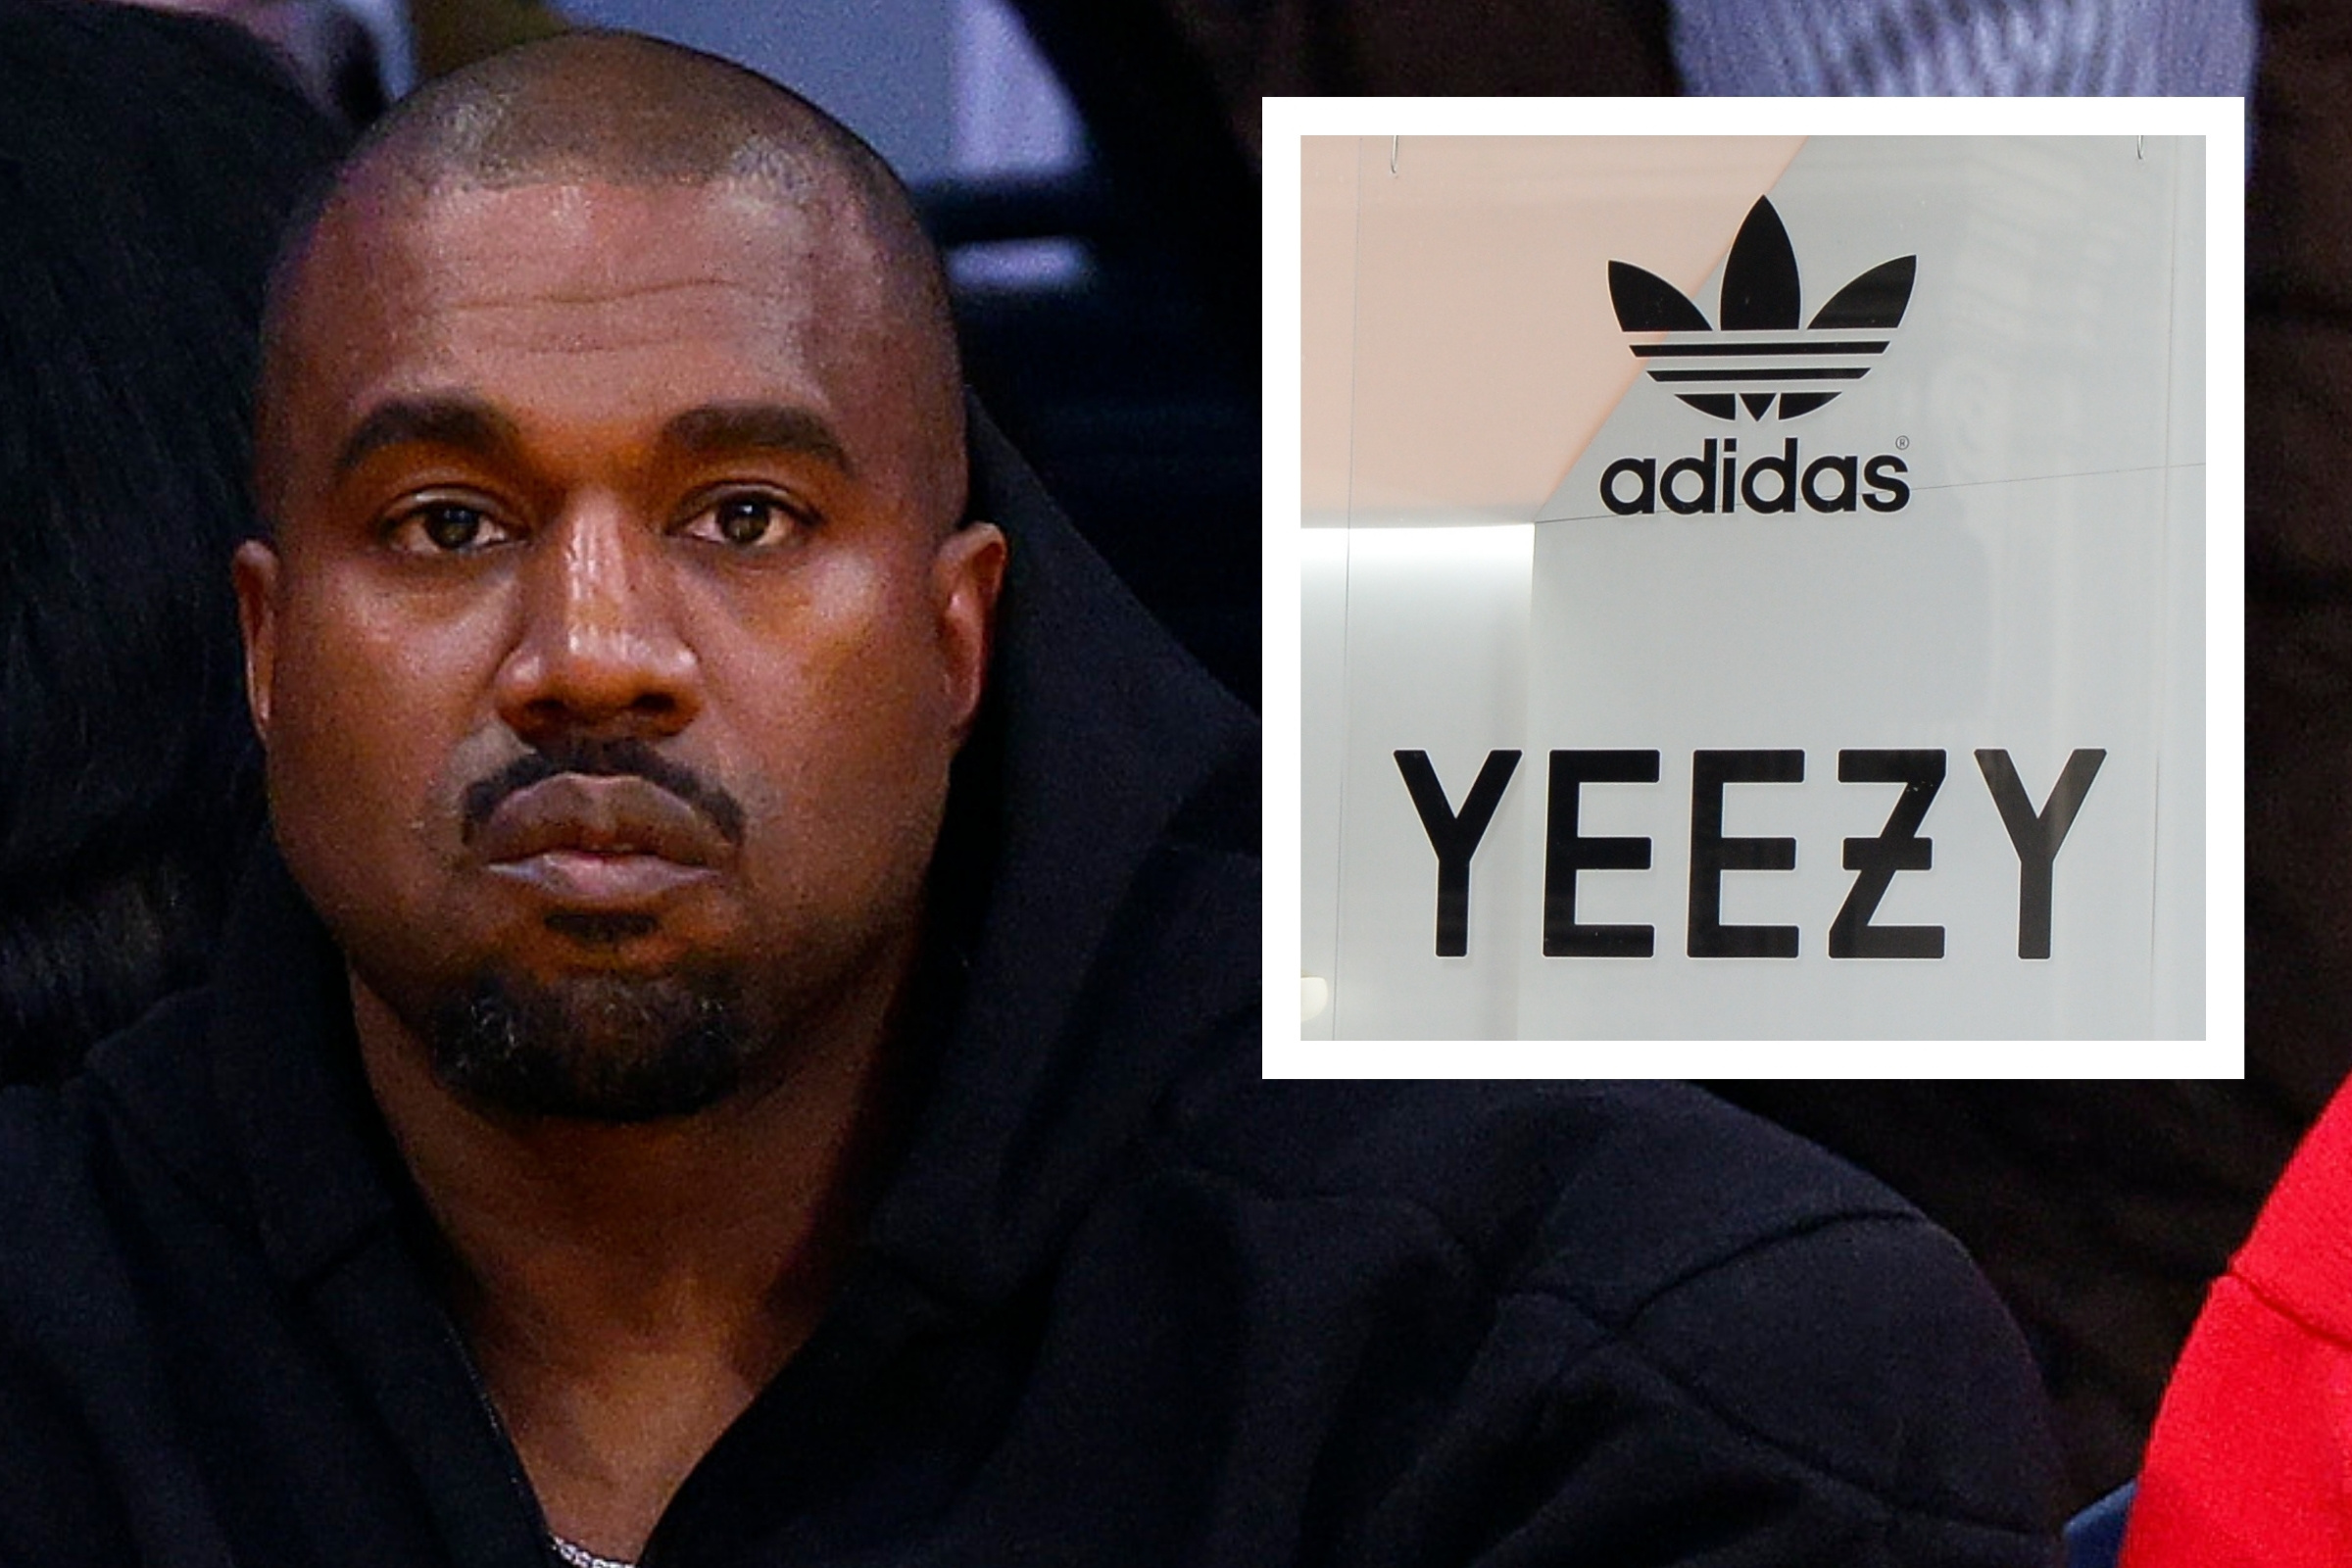 What's Next For Kanye West's Yeezy Brand?